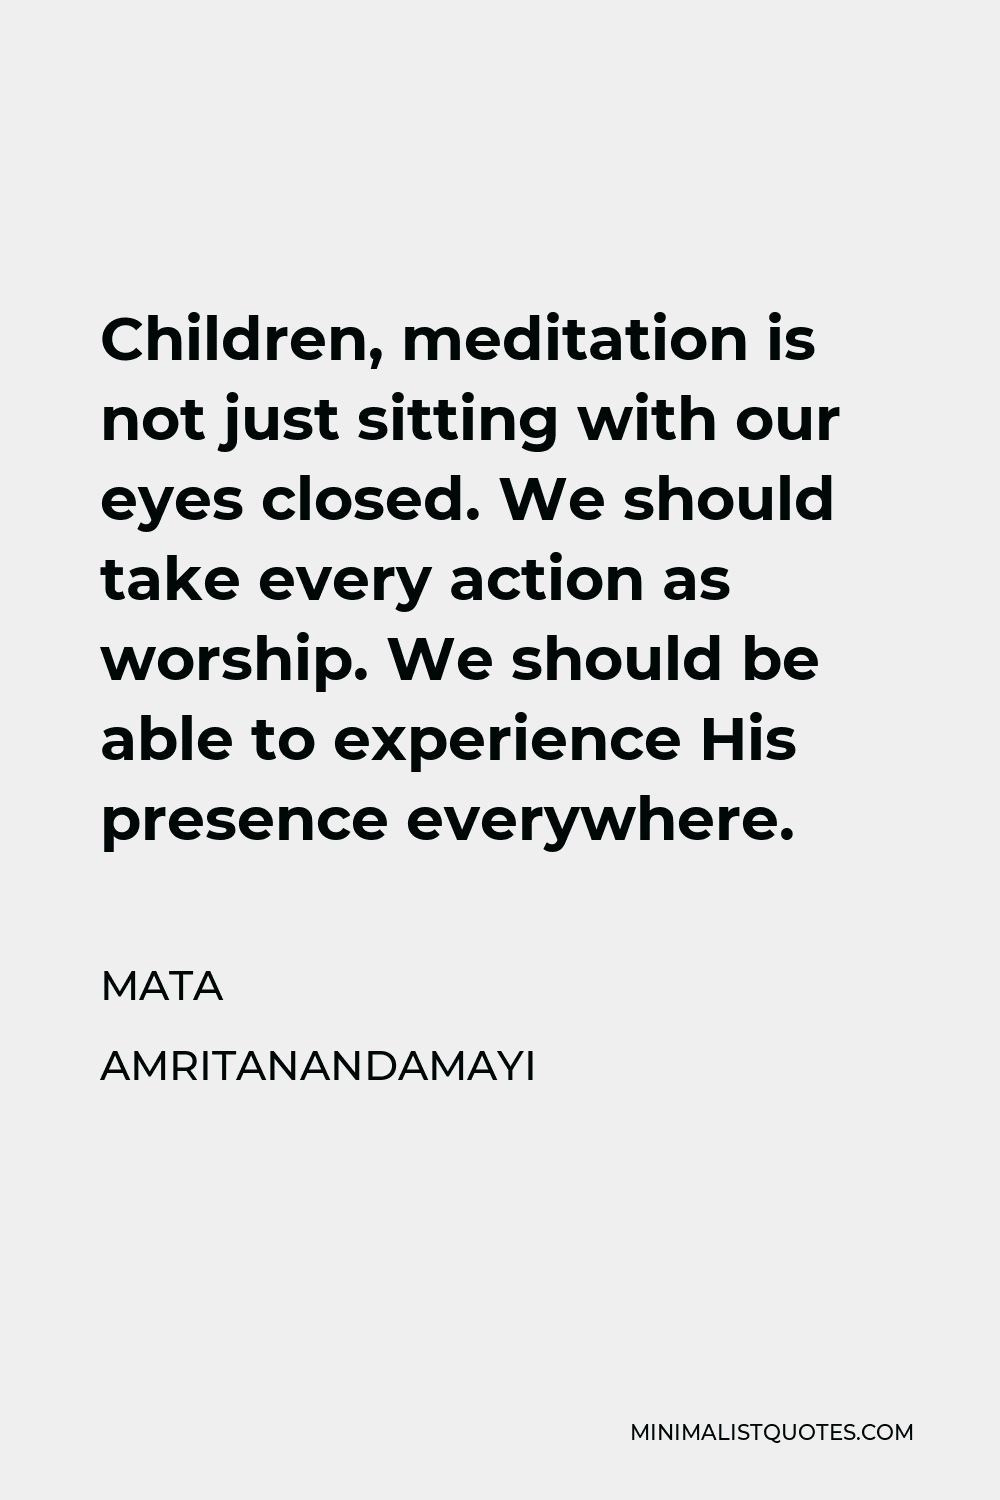 Mata Amritanandamayi Quote - Children, meditation is not just sitting with our eyes closed. We should take every action as worship. We should be able to experience His presence everywhere.